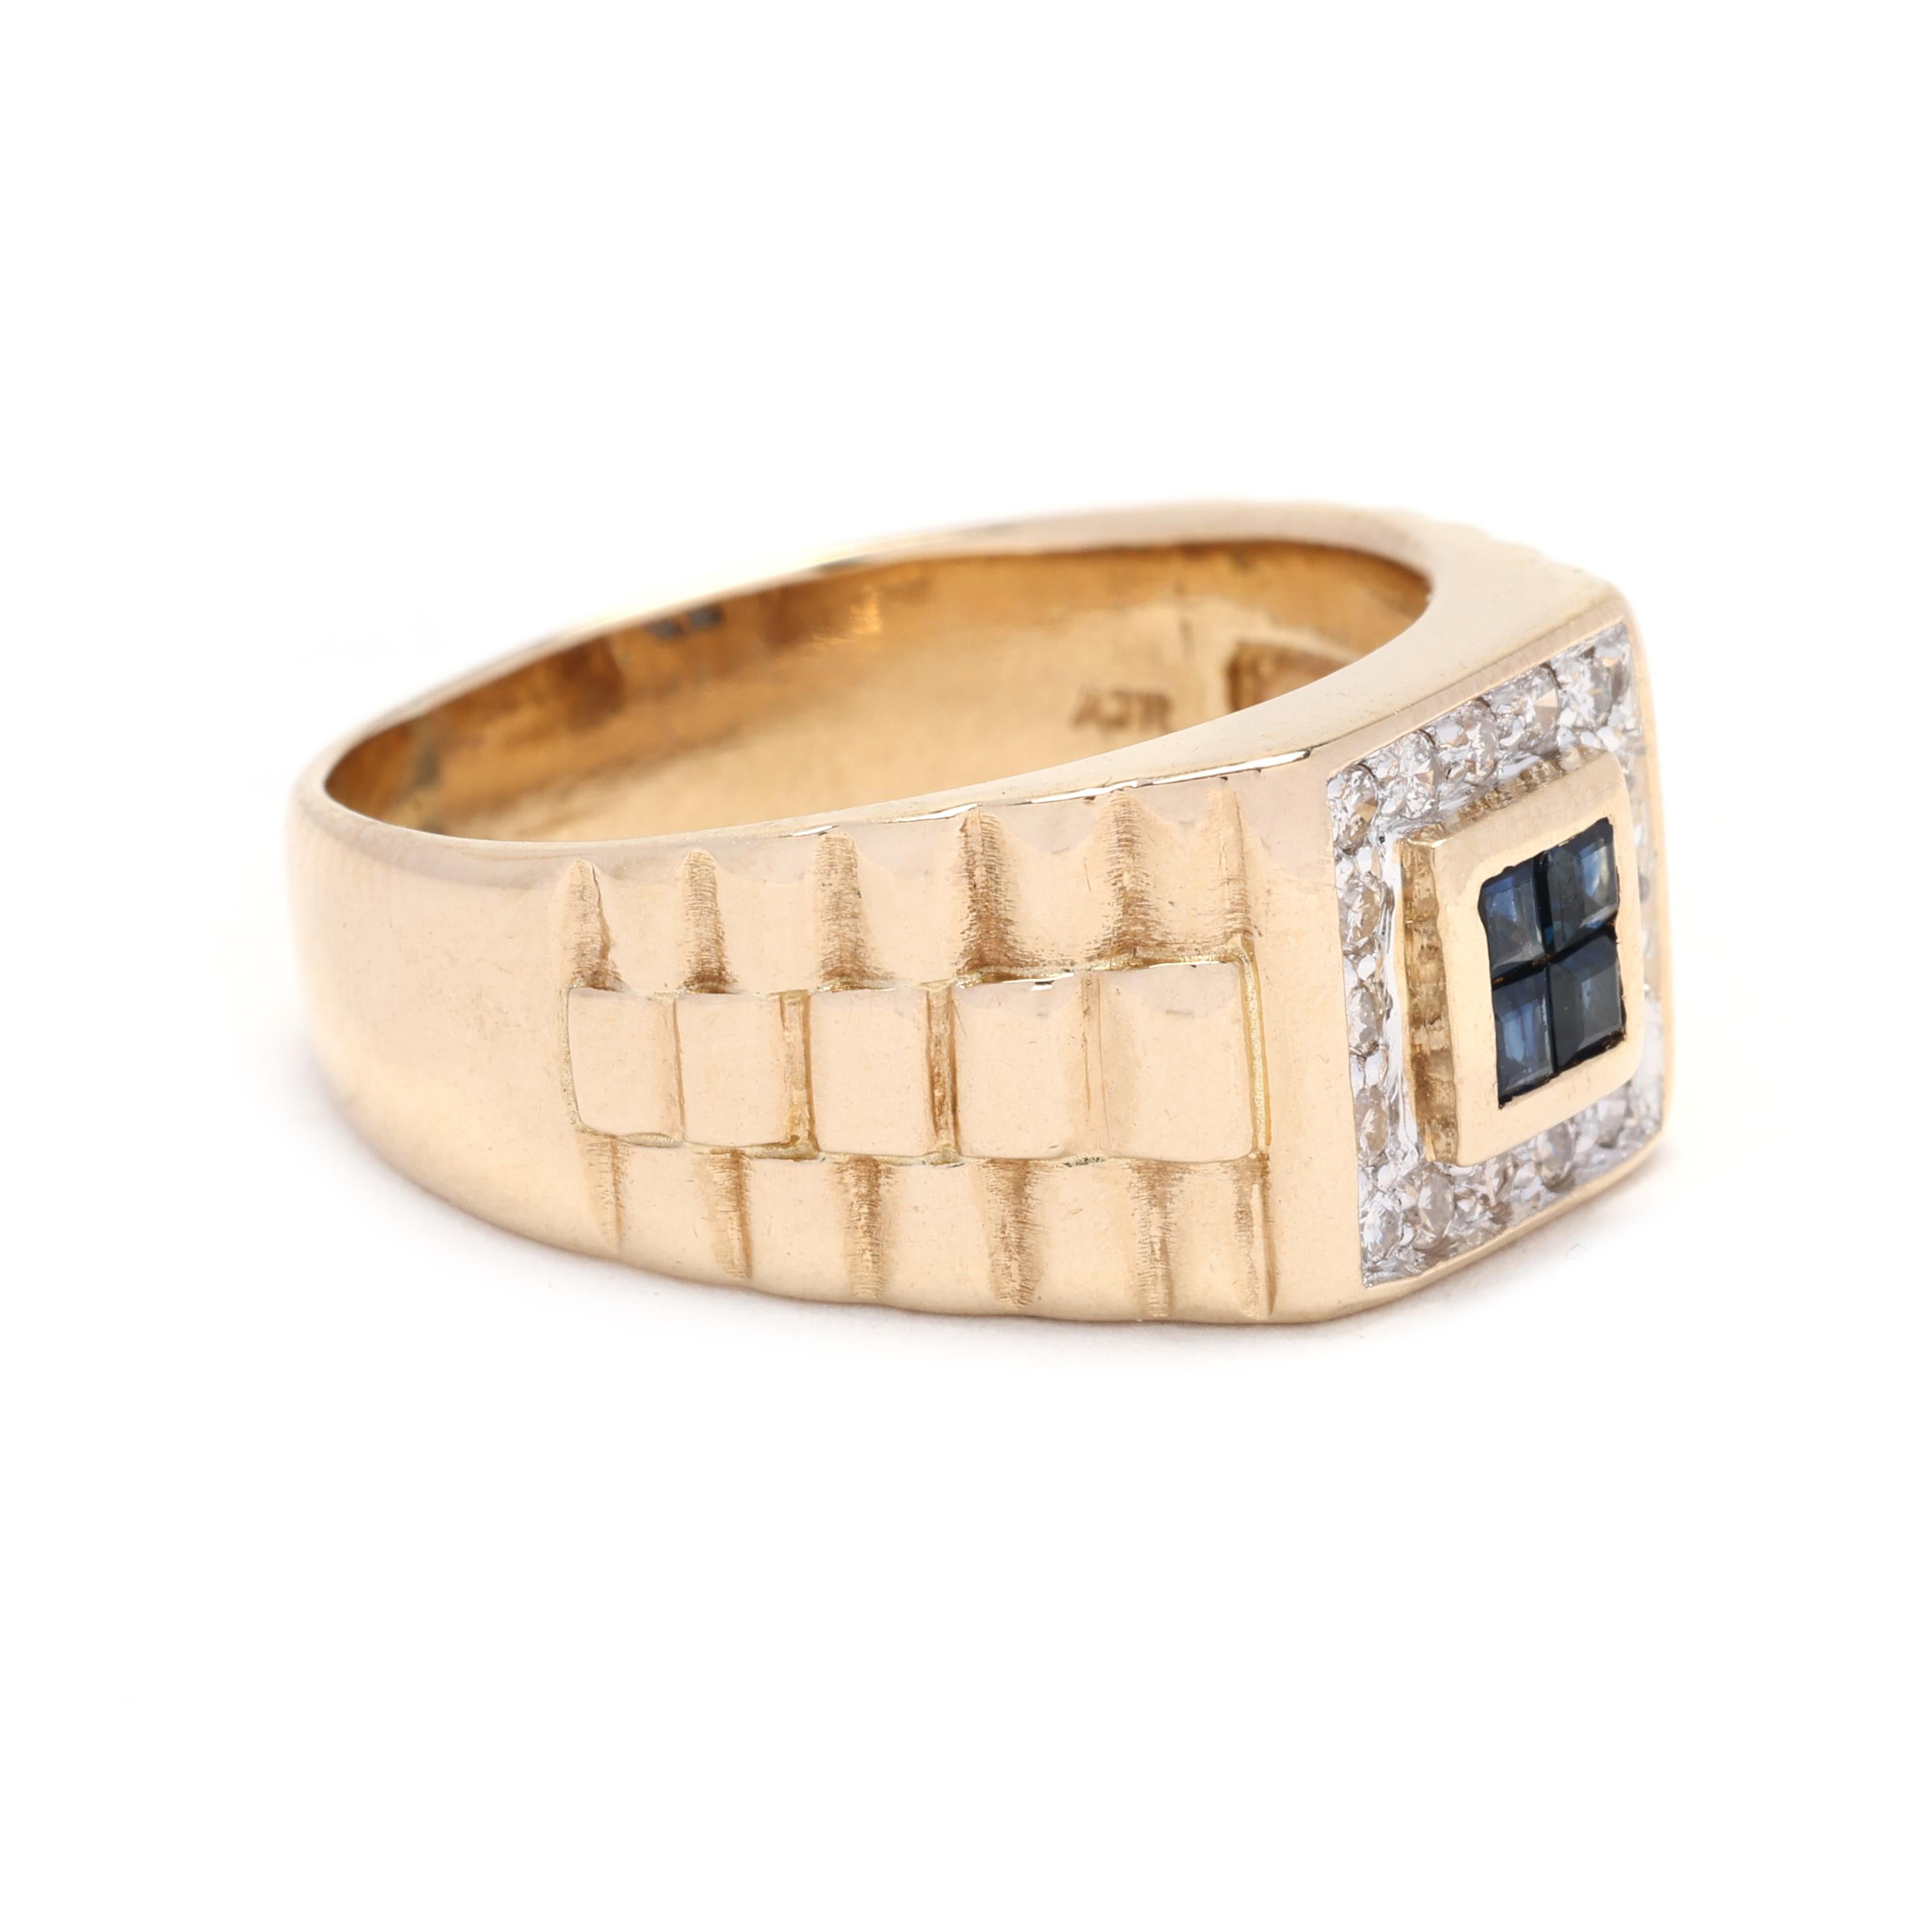 This 0.40ctw Sapphire & Diamond 'Rolex' Ring is a stunning piece of jewelry that is guaranteed to make a statement. Made with 14k yellow gold, this ring showcases a beautiful combination of sapphire and diamonds. The 0.25ctw sapphire creates a rich